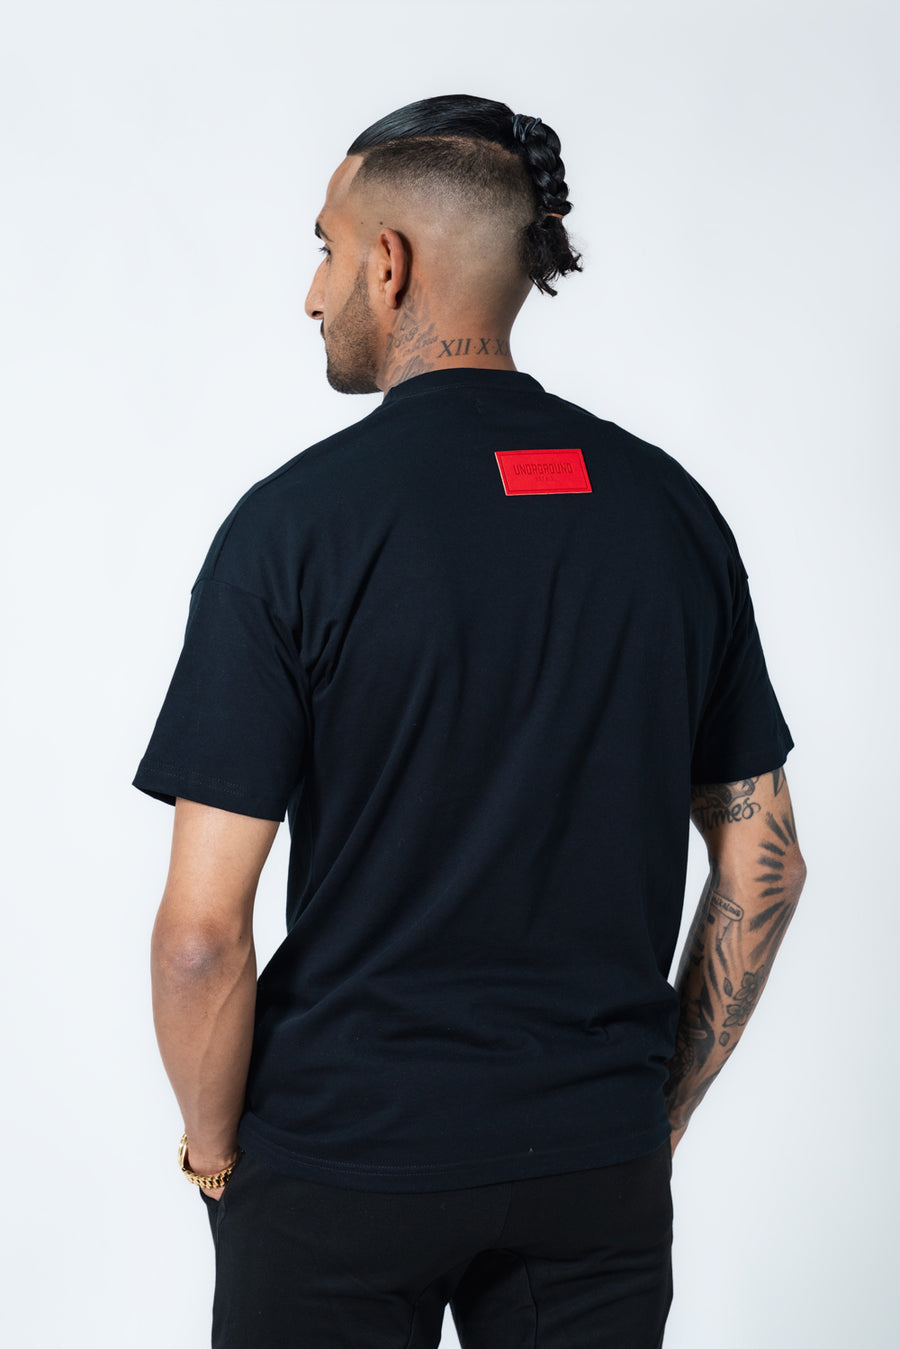 Black/Red Leather Patch Tee